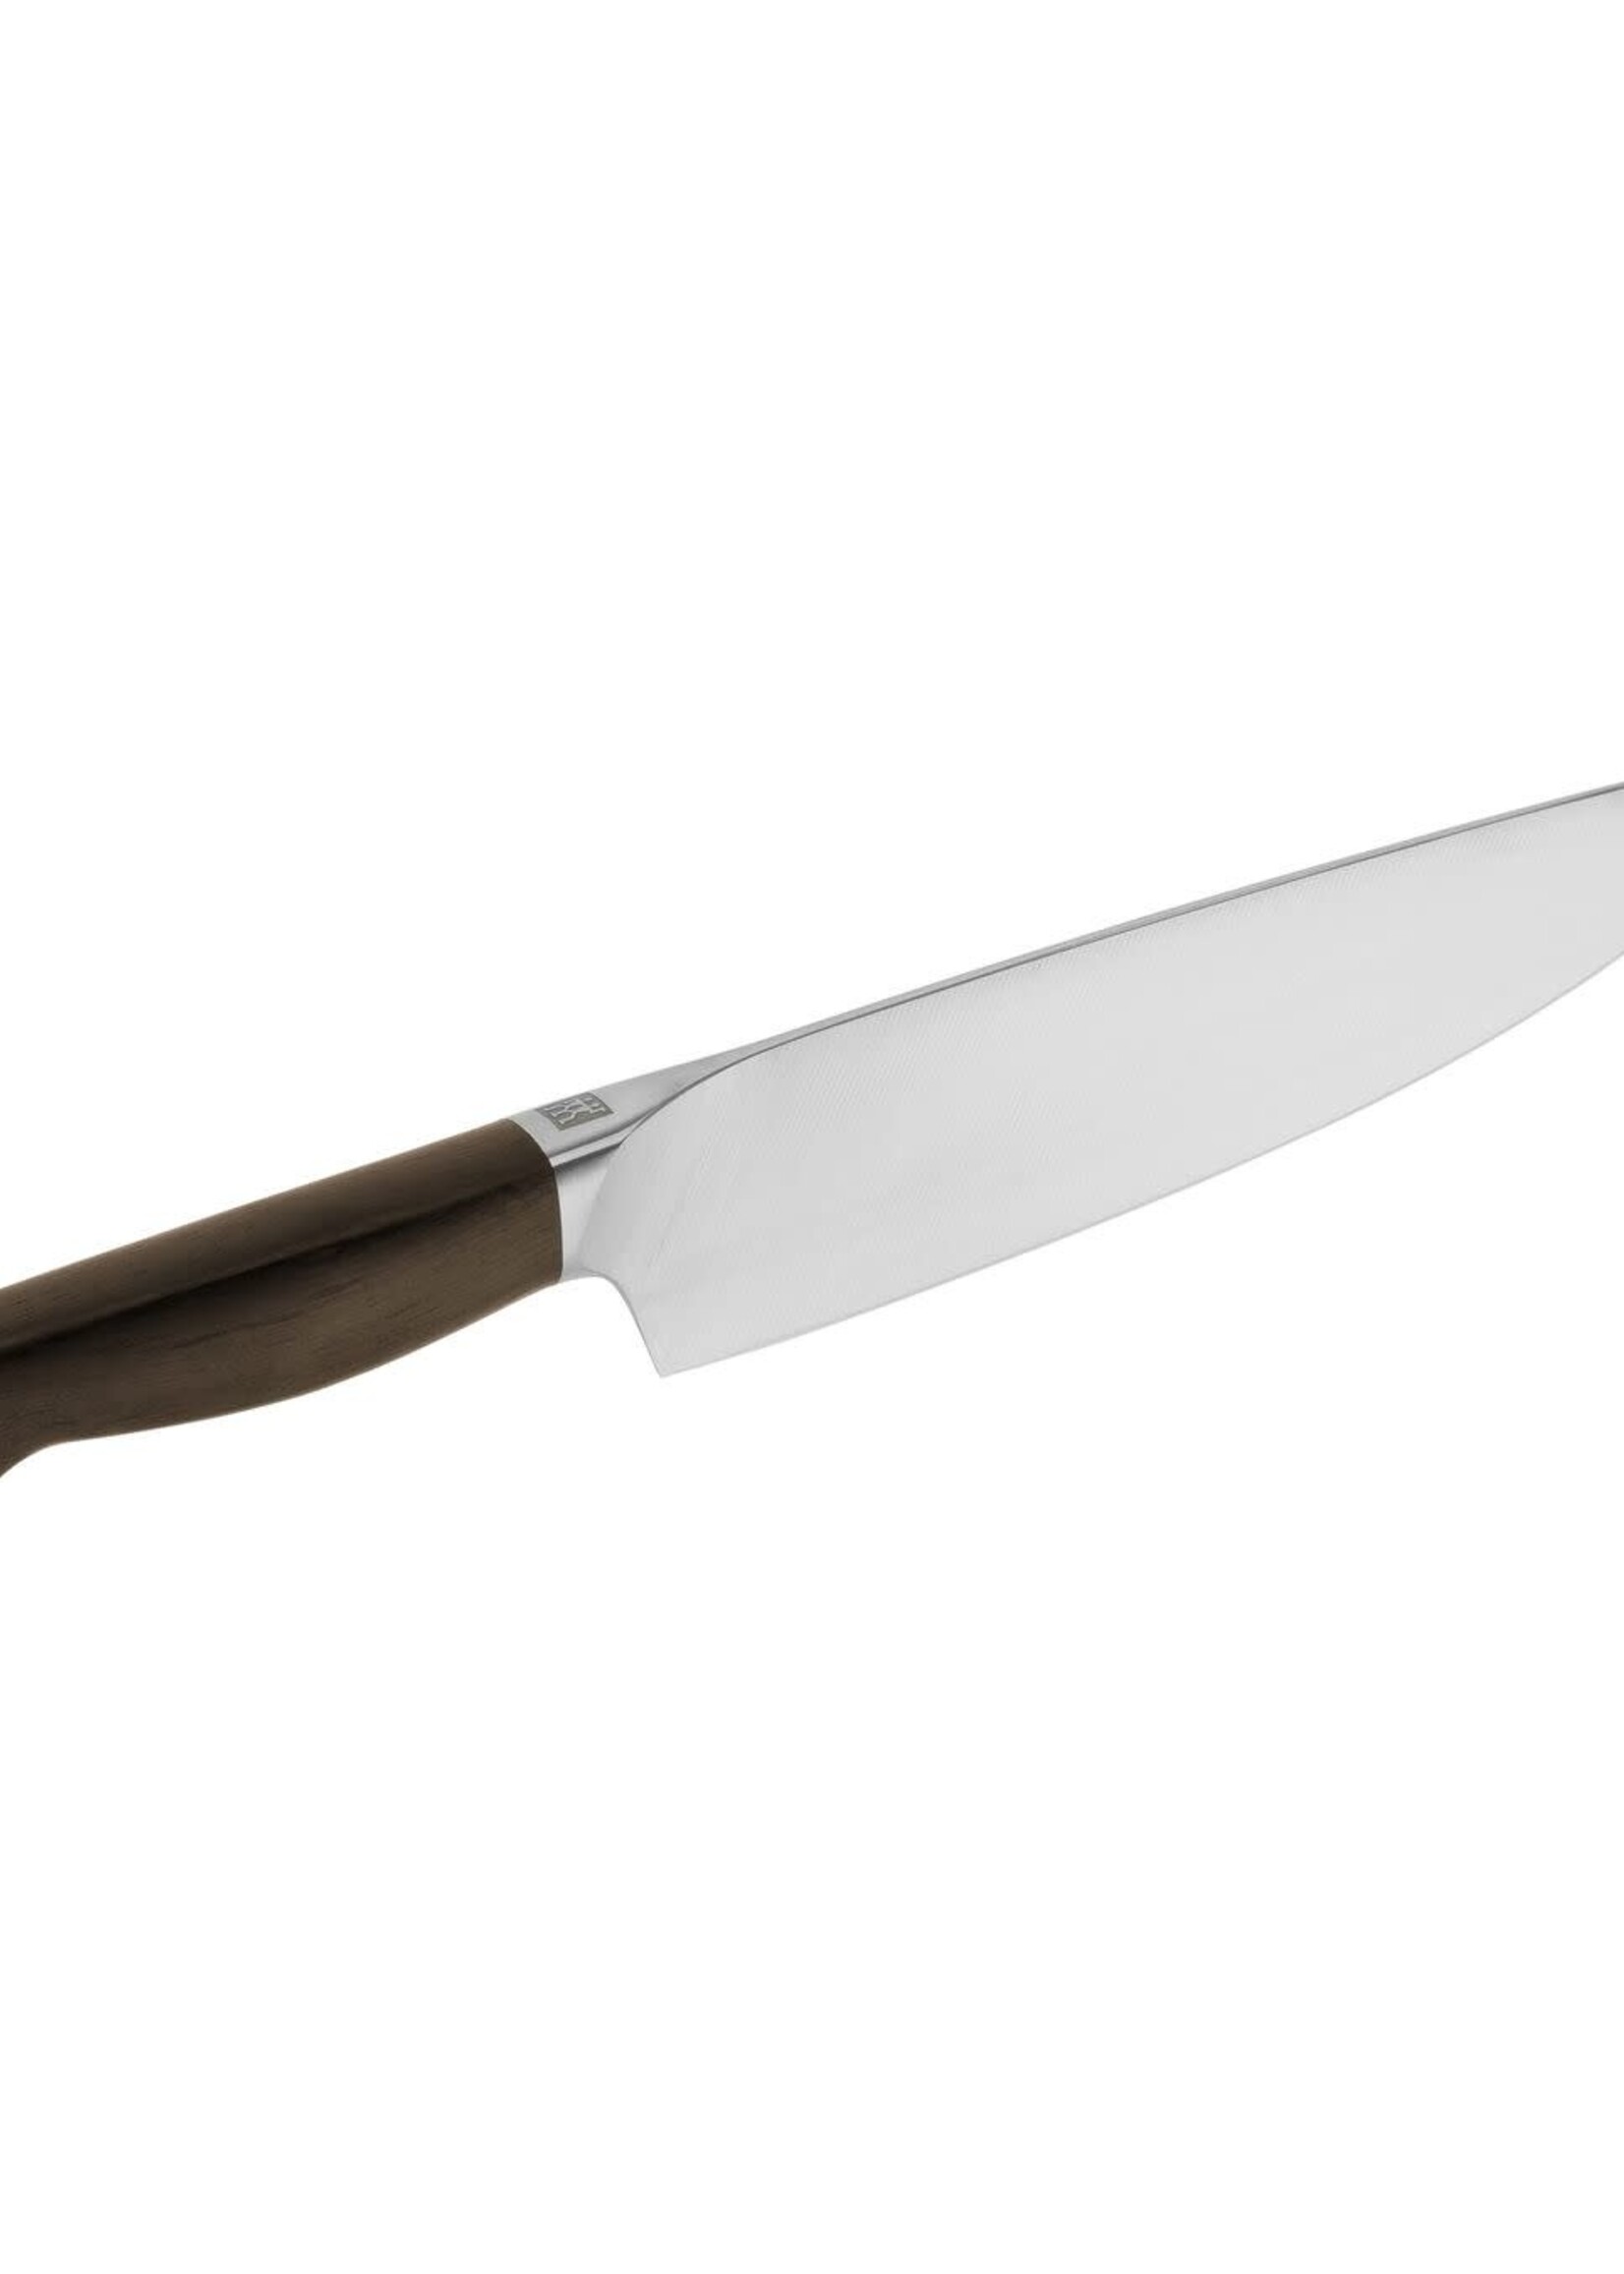 Zwilling Twin 1731 8" Chef's Knife